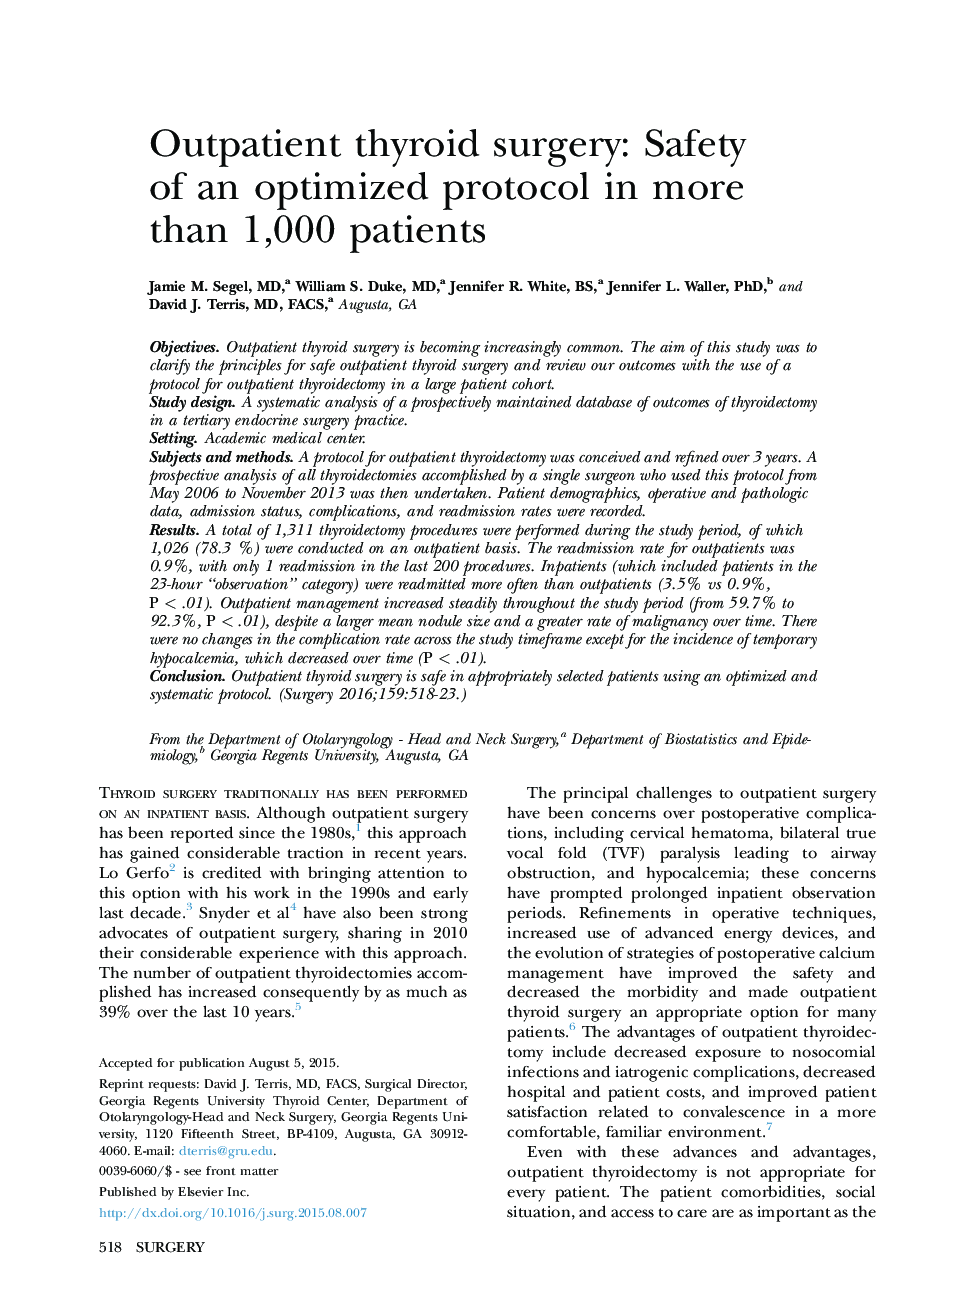 Outpatient thyroid surgery: Safety of an optimized protocol in more than 1,000 patients